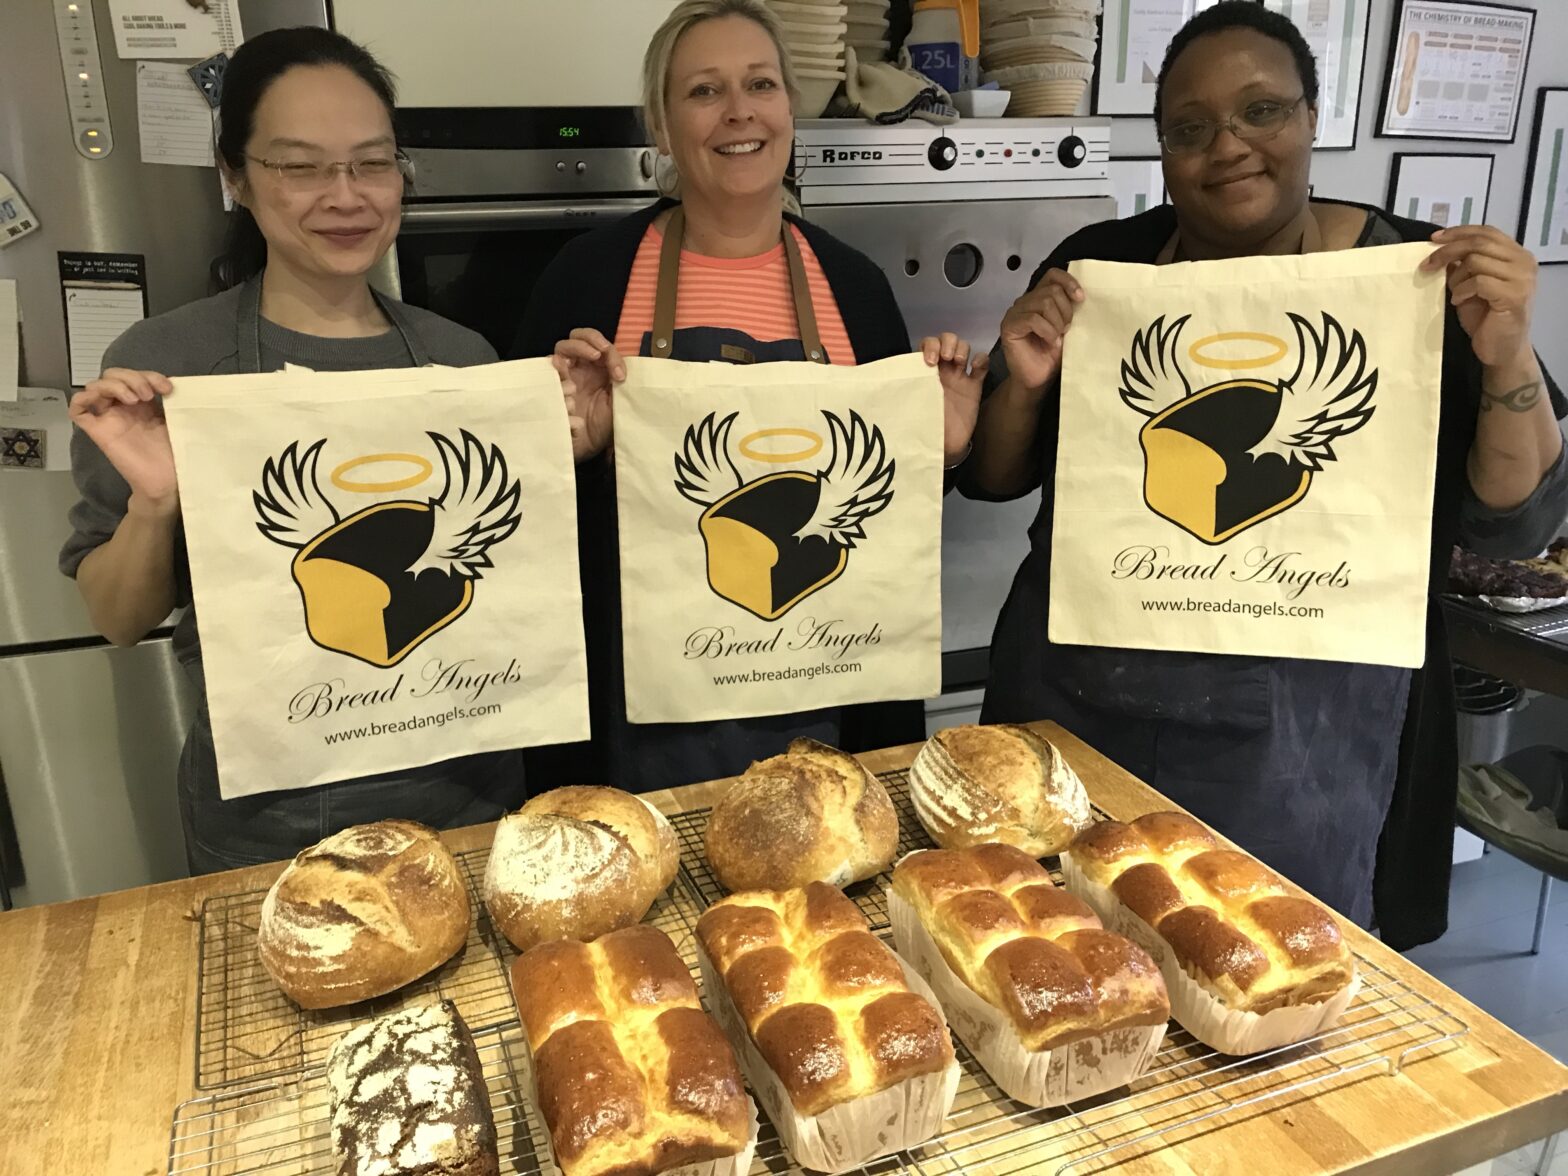 Three new Bread Angels ready to fly the nest